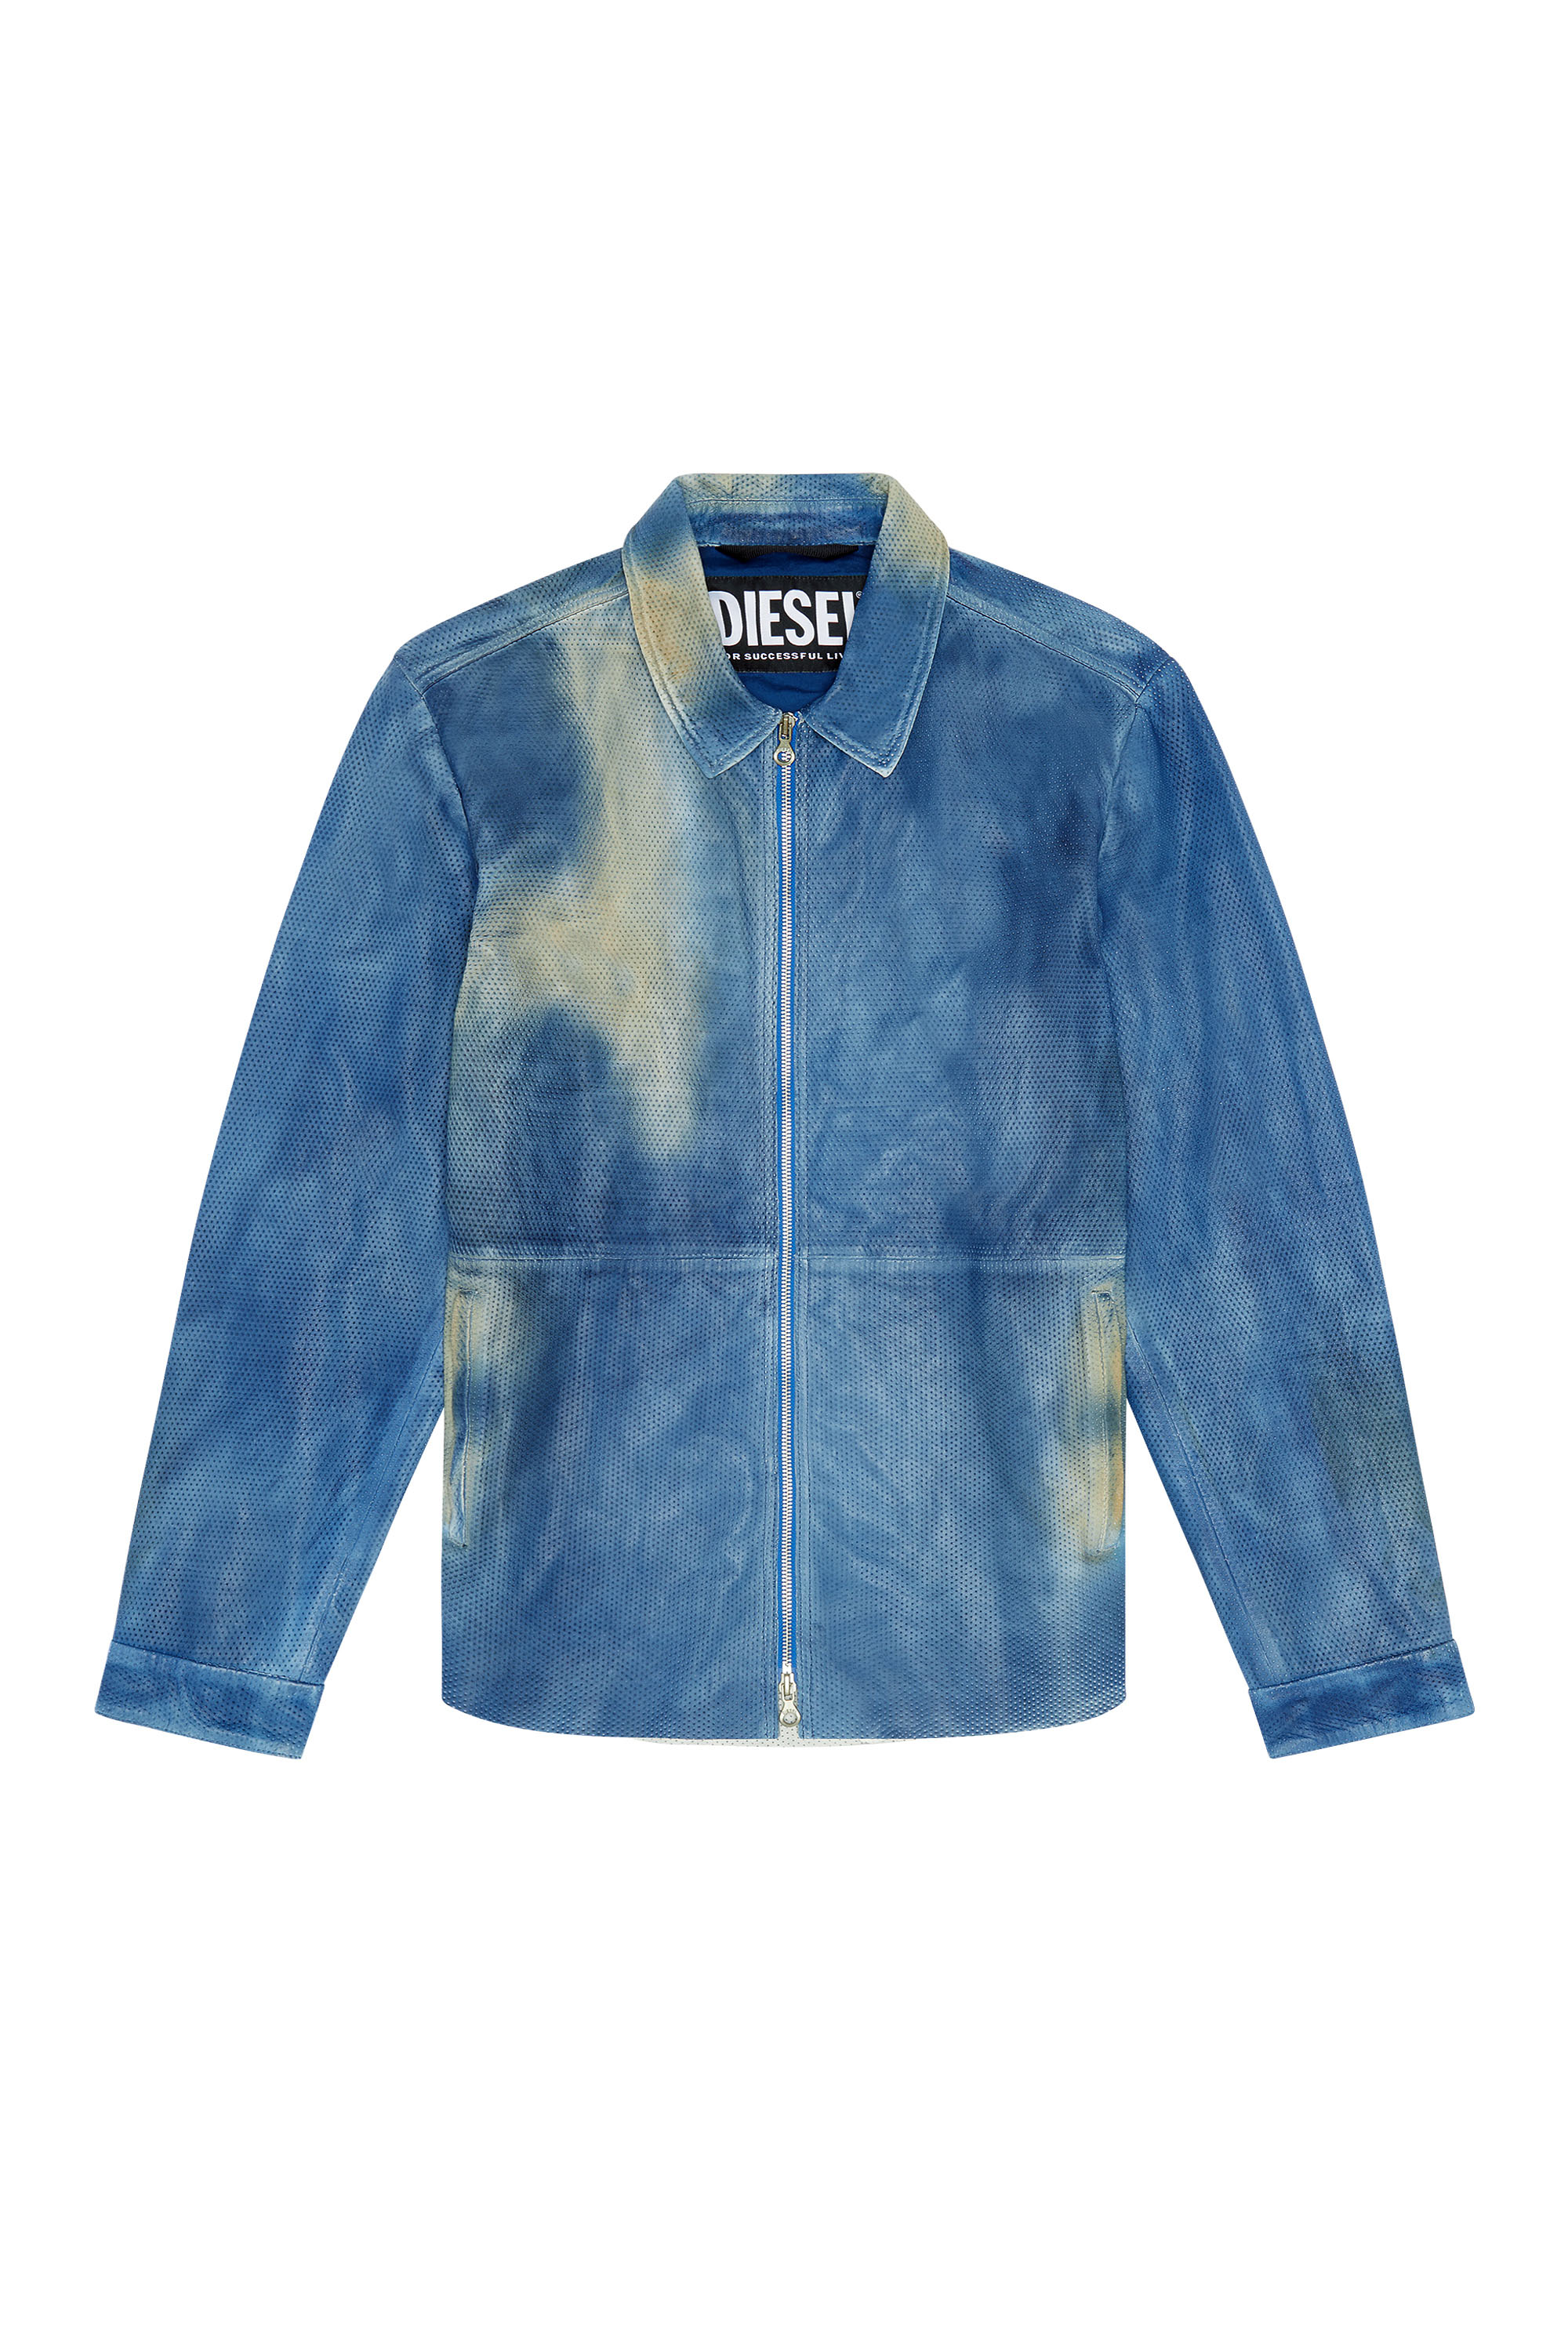 L-CLIME, Blue - Leather jackets